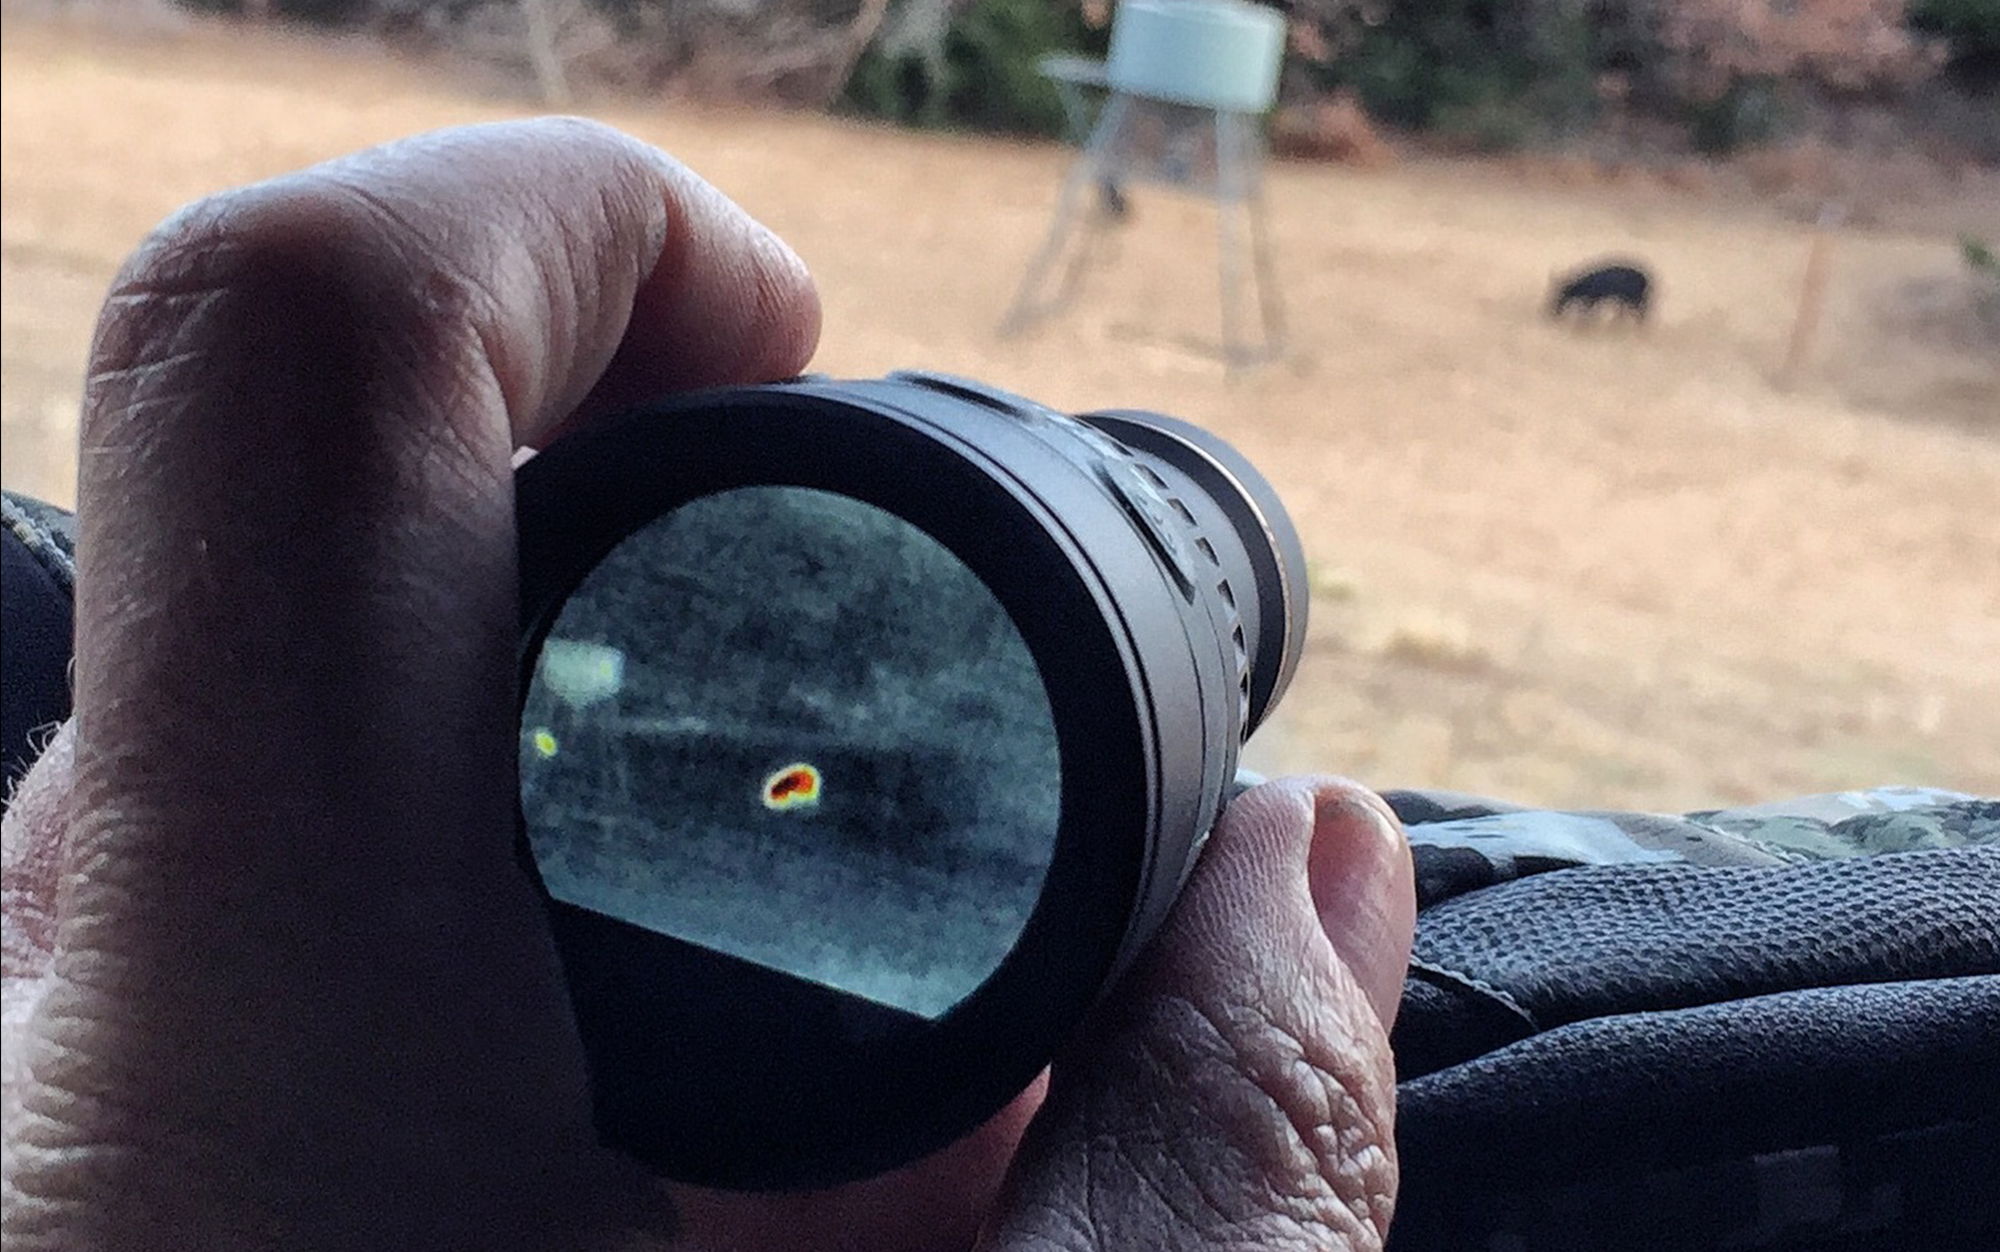 Thermal Scopes For Game Tracking